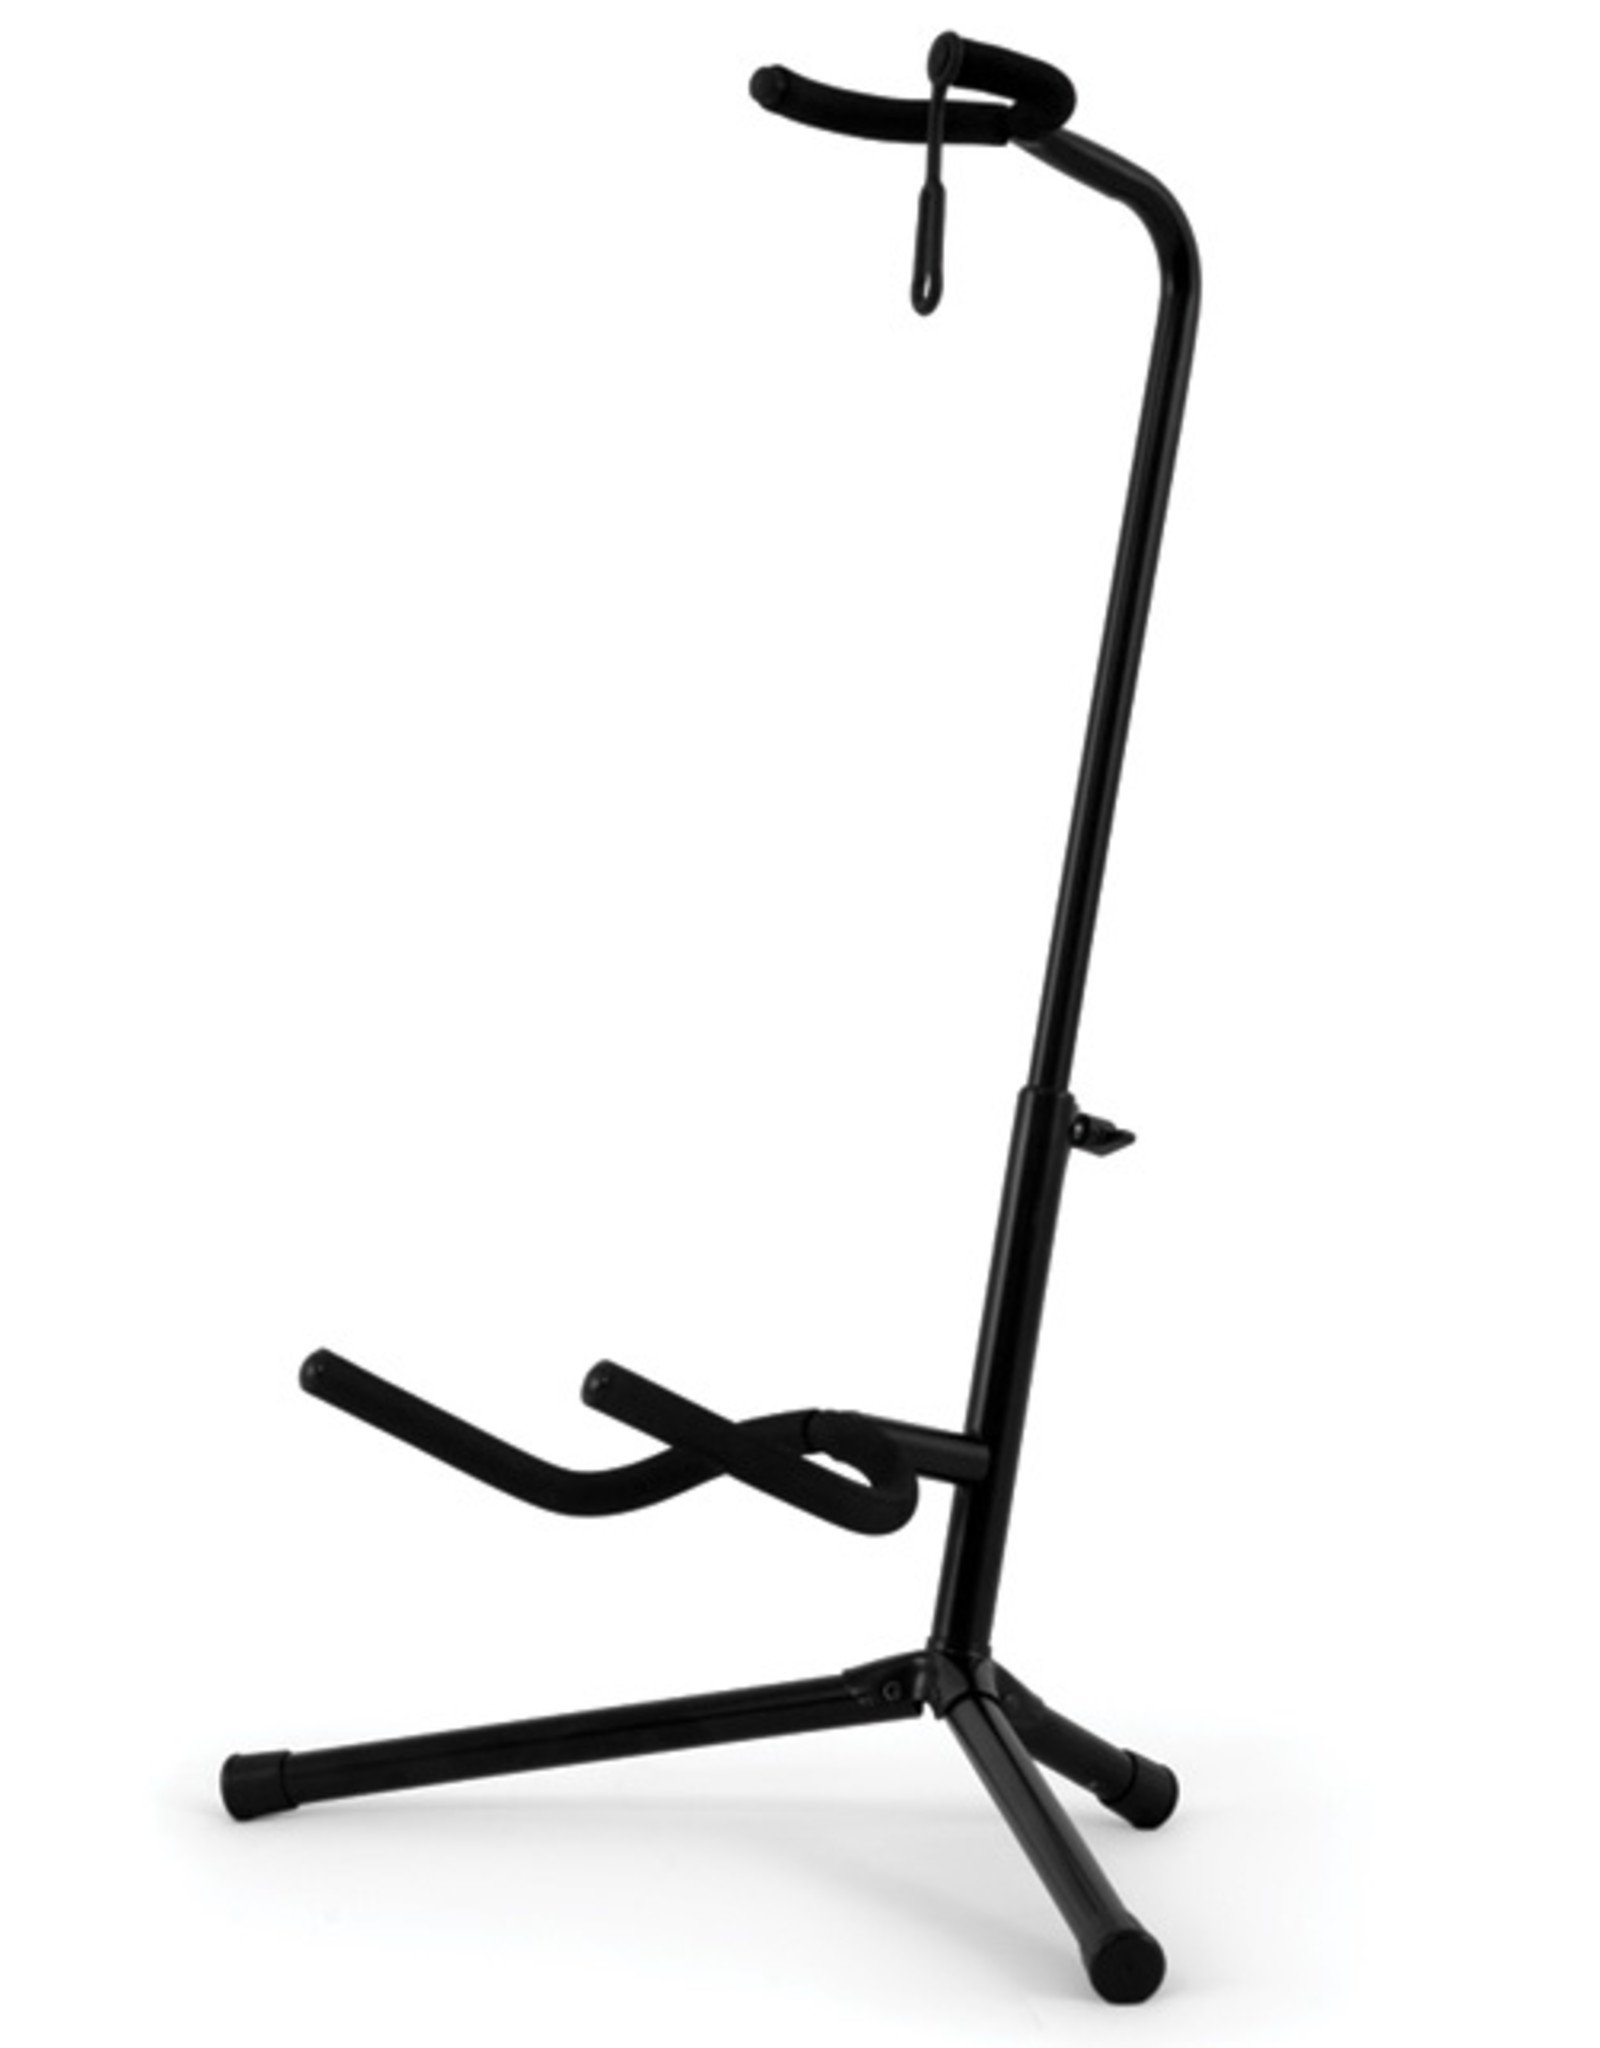 Nomad Nomad Guitar Stand with Safety Strap